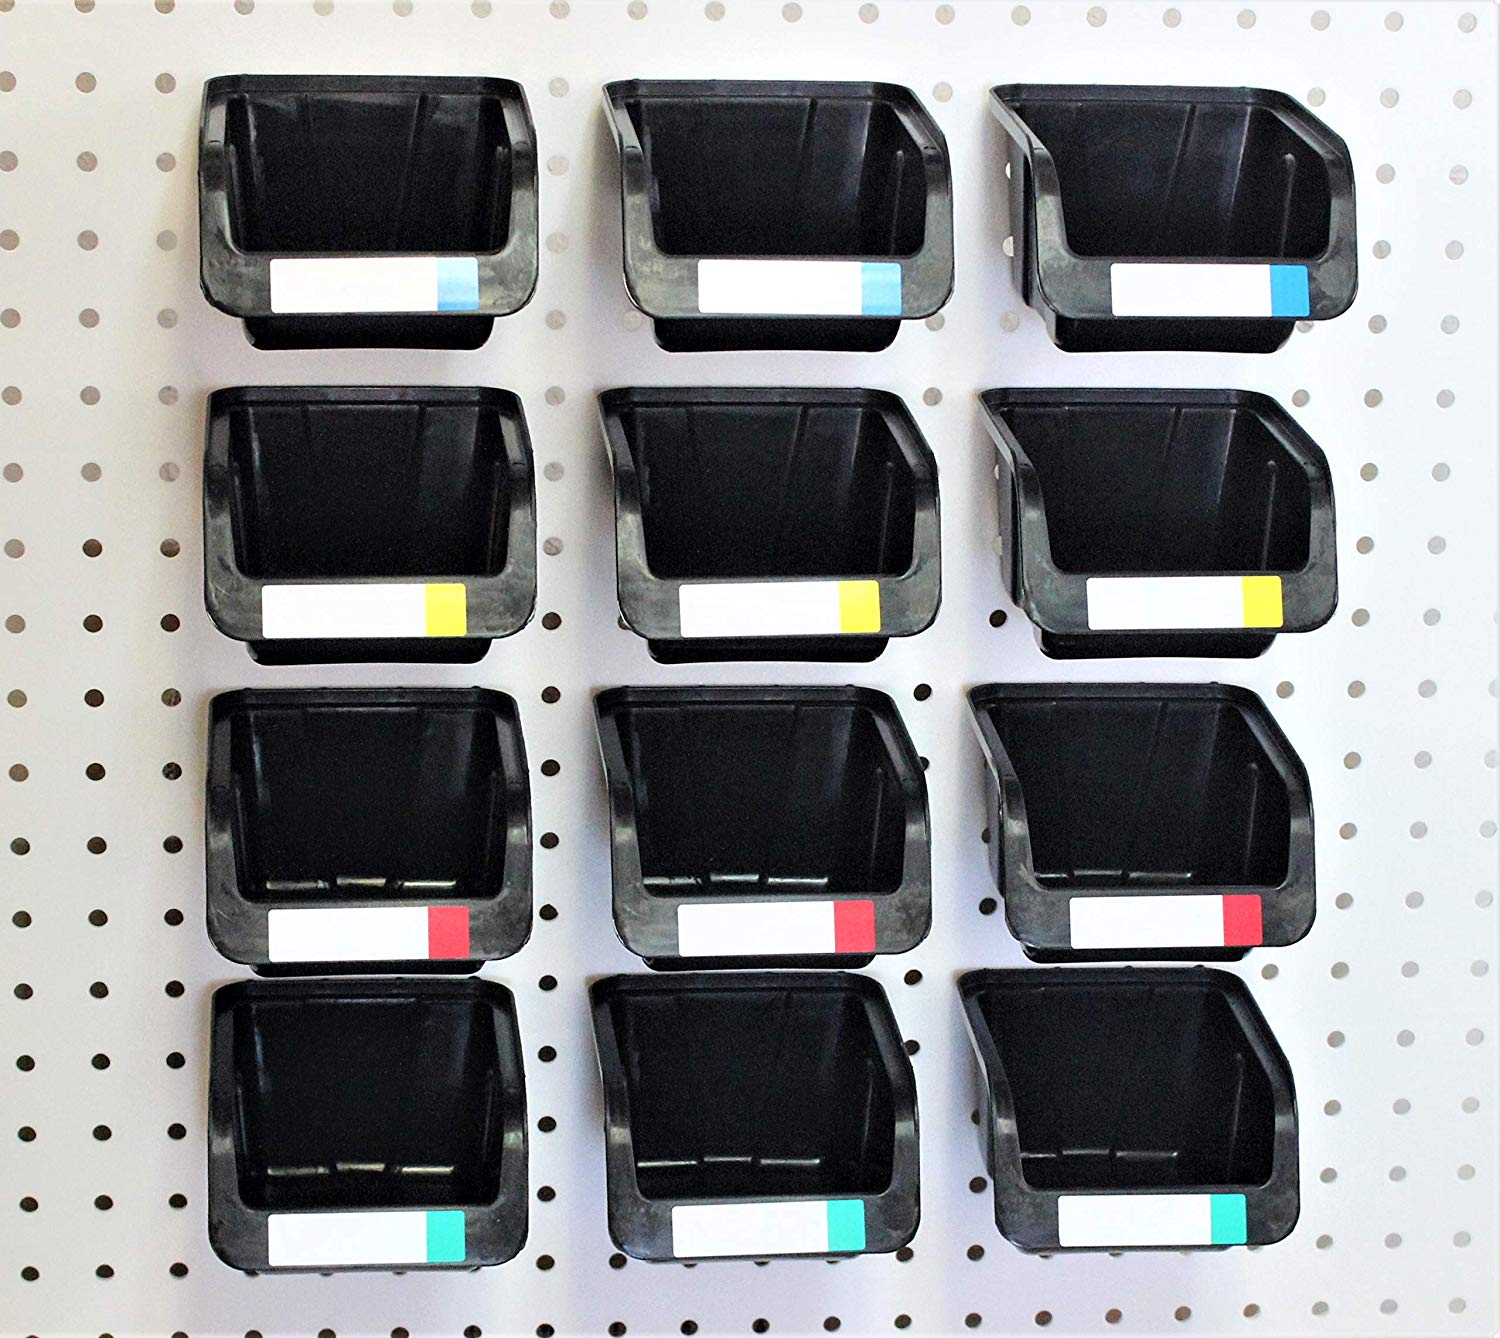 New Incly 15 Pack Black Plastic Pegboard Bins Storage Set Hooks to Any Peg Board